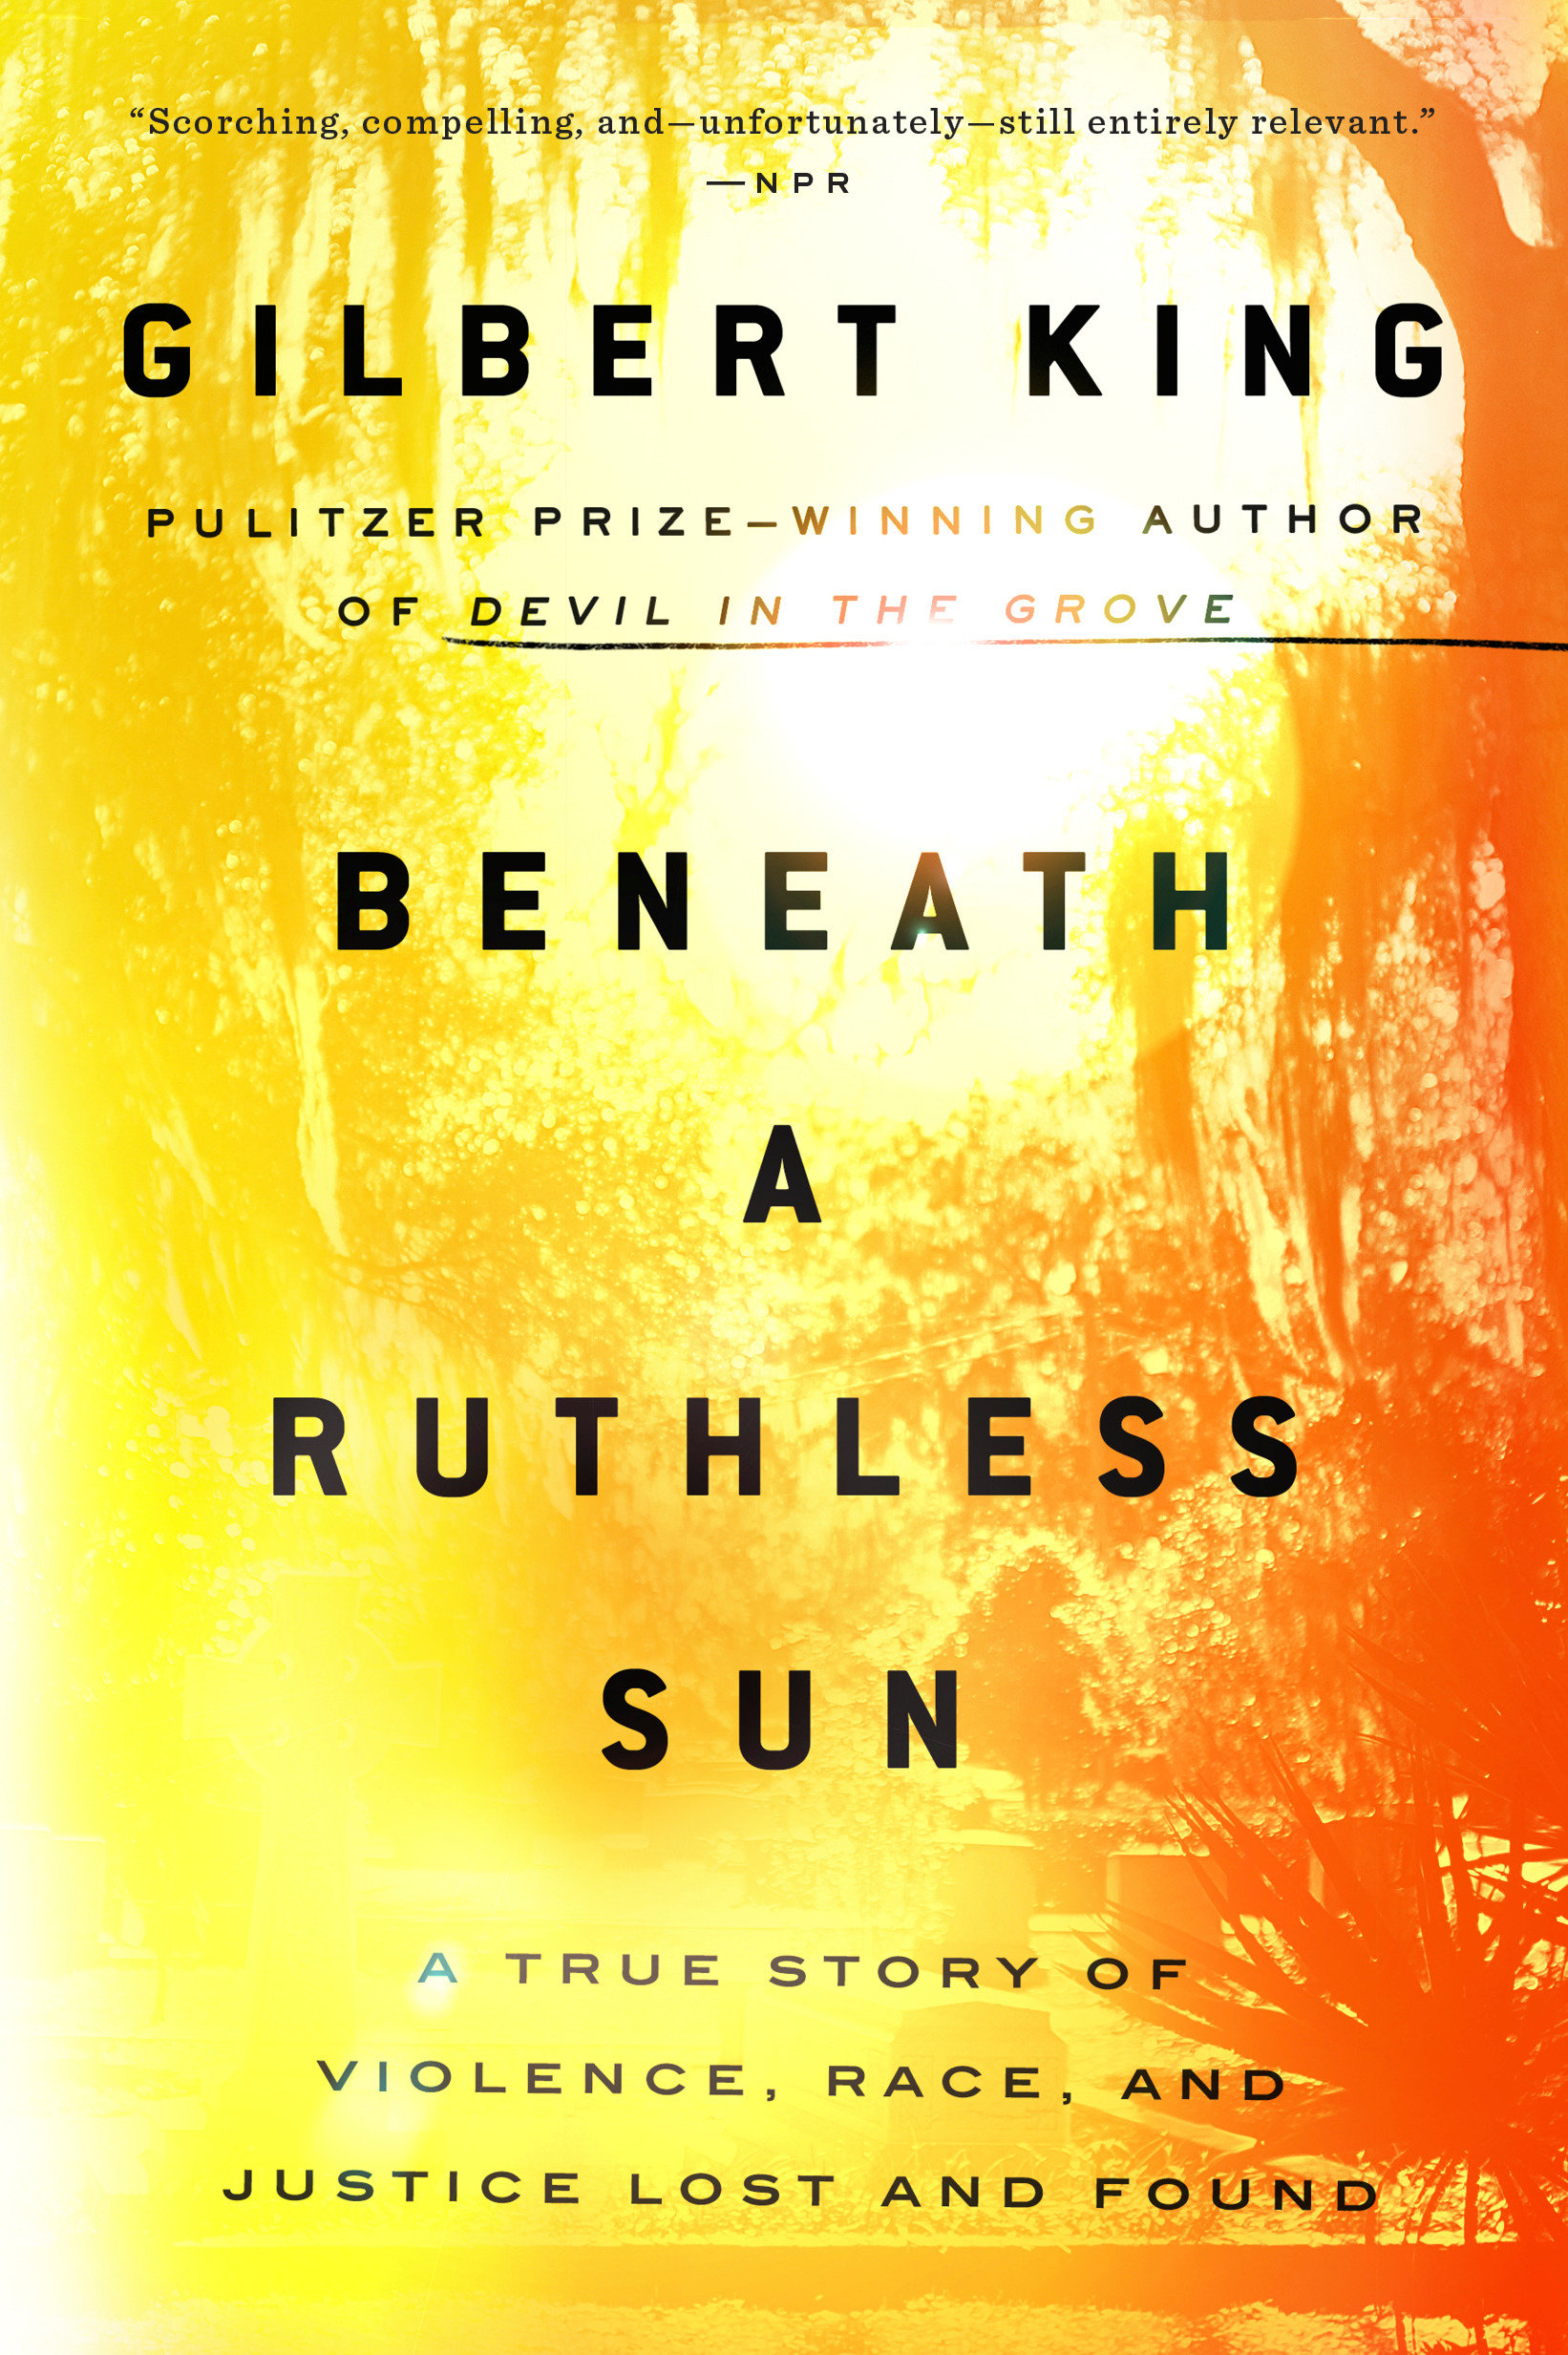 Beneath a ruthless sun a true story of violence, race, and justice lost and found cover image